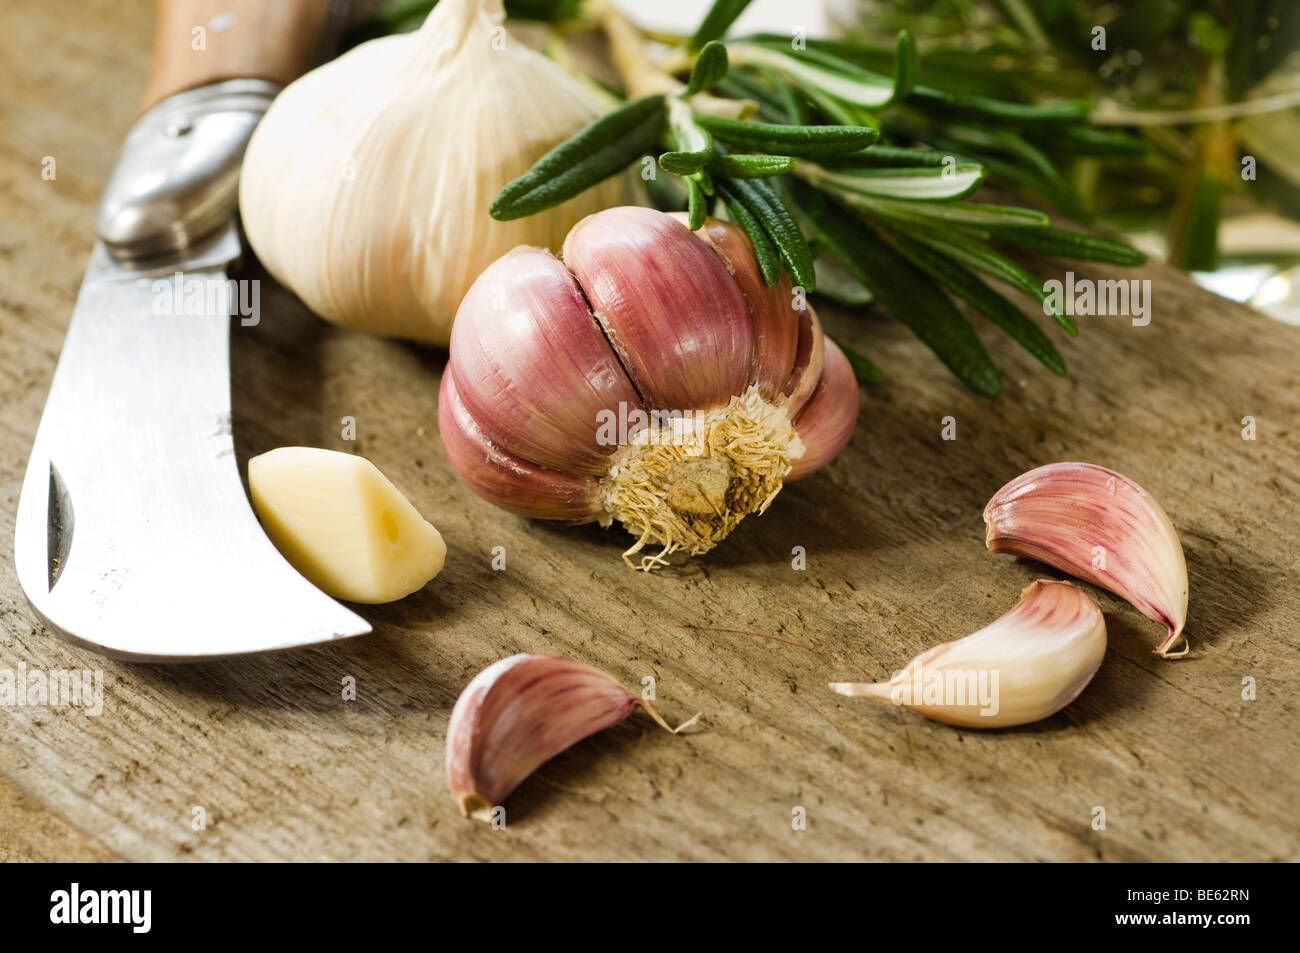 Garlic bulb on a rustic-style board, knife and garlic cloves Stock Photo